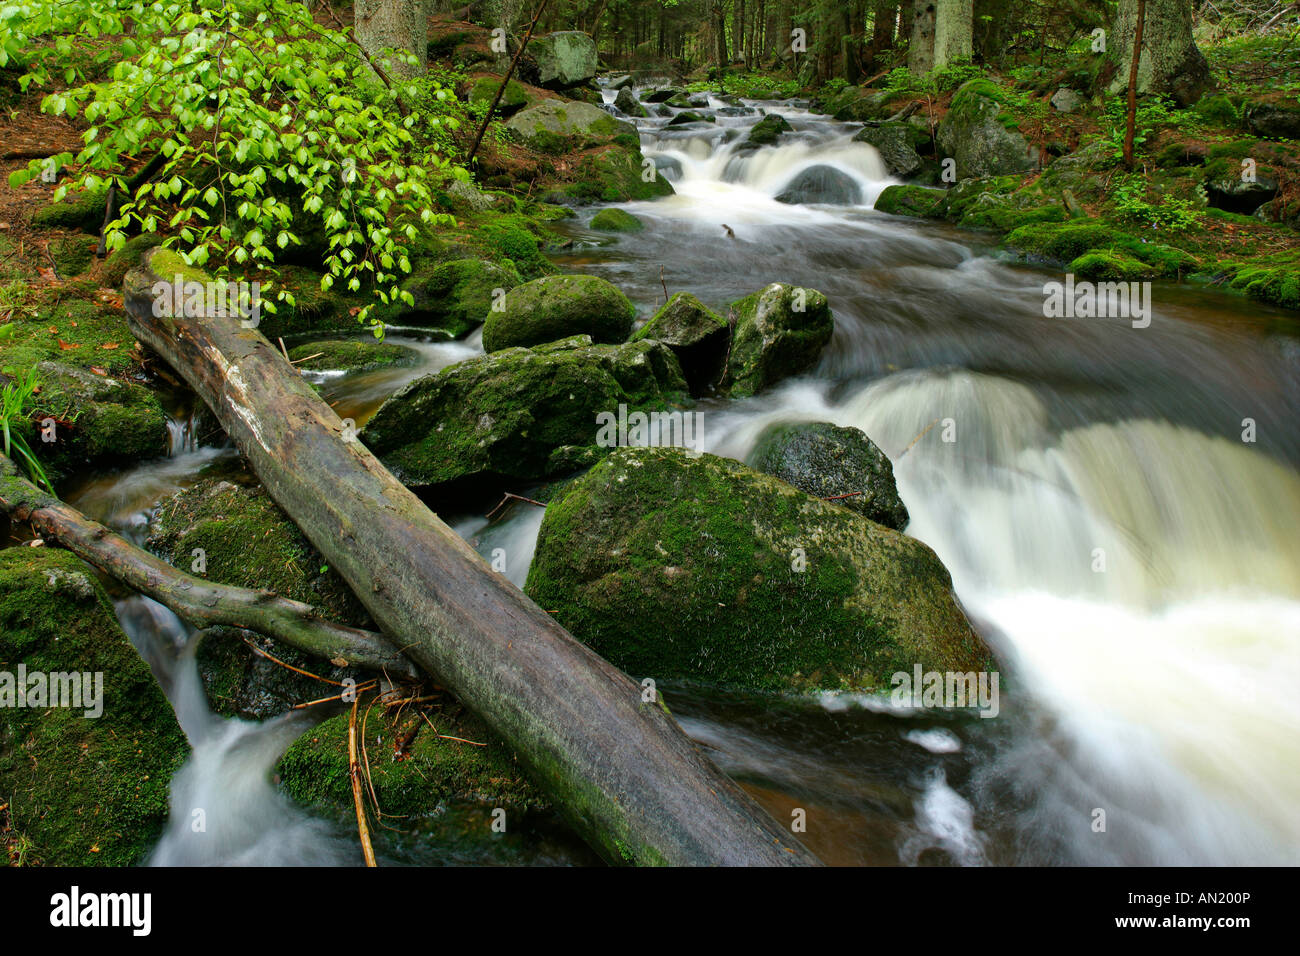 Stream with moss covered rocks in primeval forest Bavarian Forest National Park Bavaria Germany Stock Photo